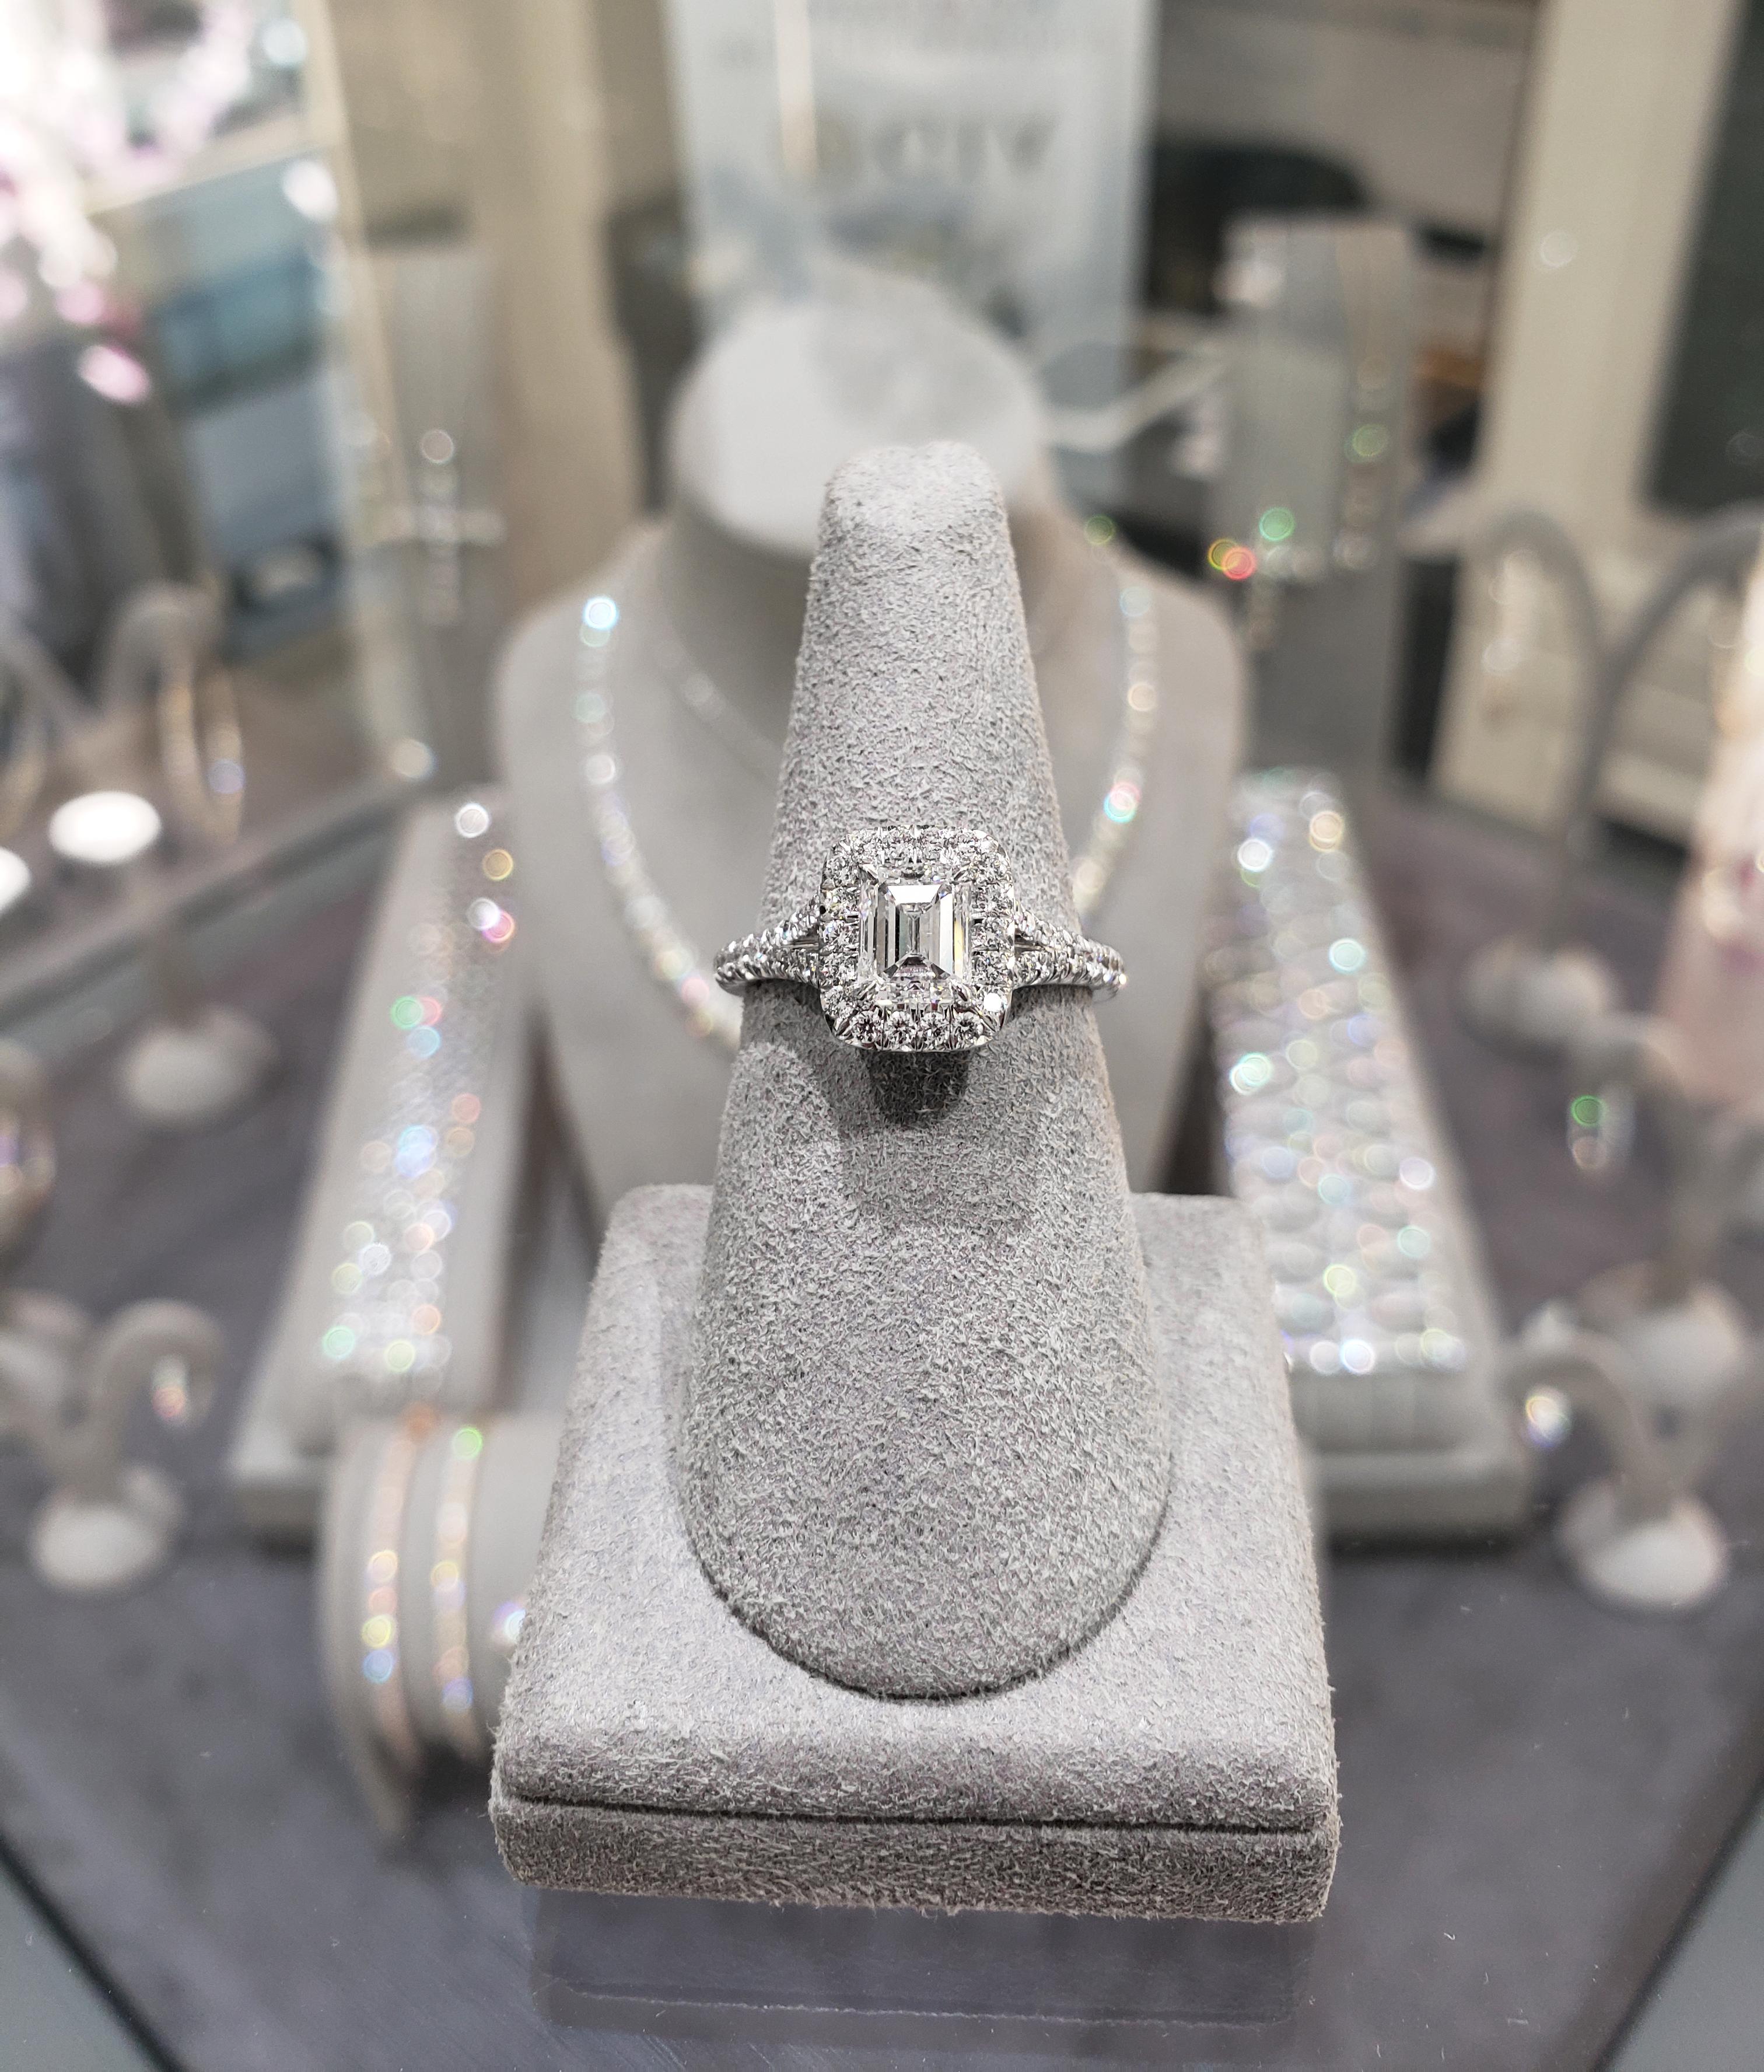 Handcrafted in everlasting platinum, this brilliant engagement ring showcases a 1.01 carat GIA Certified (D color, VS2 clarity) center diamond, surrounded by a single row of sparkling round diamonds. Set on a split-shank composition accented with